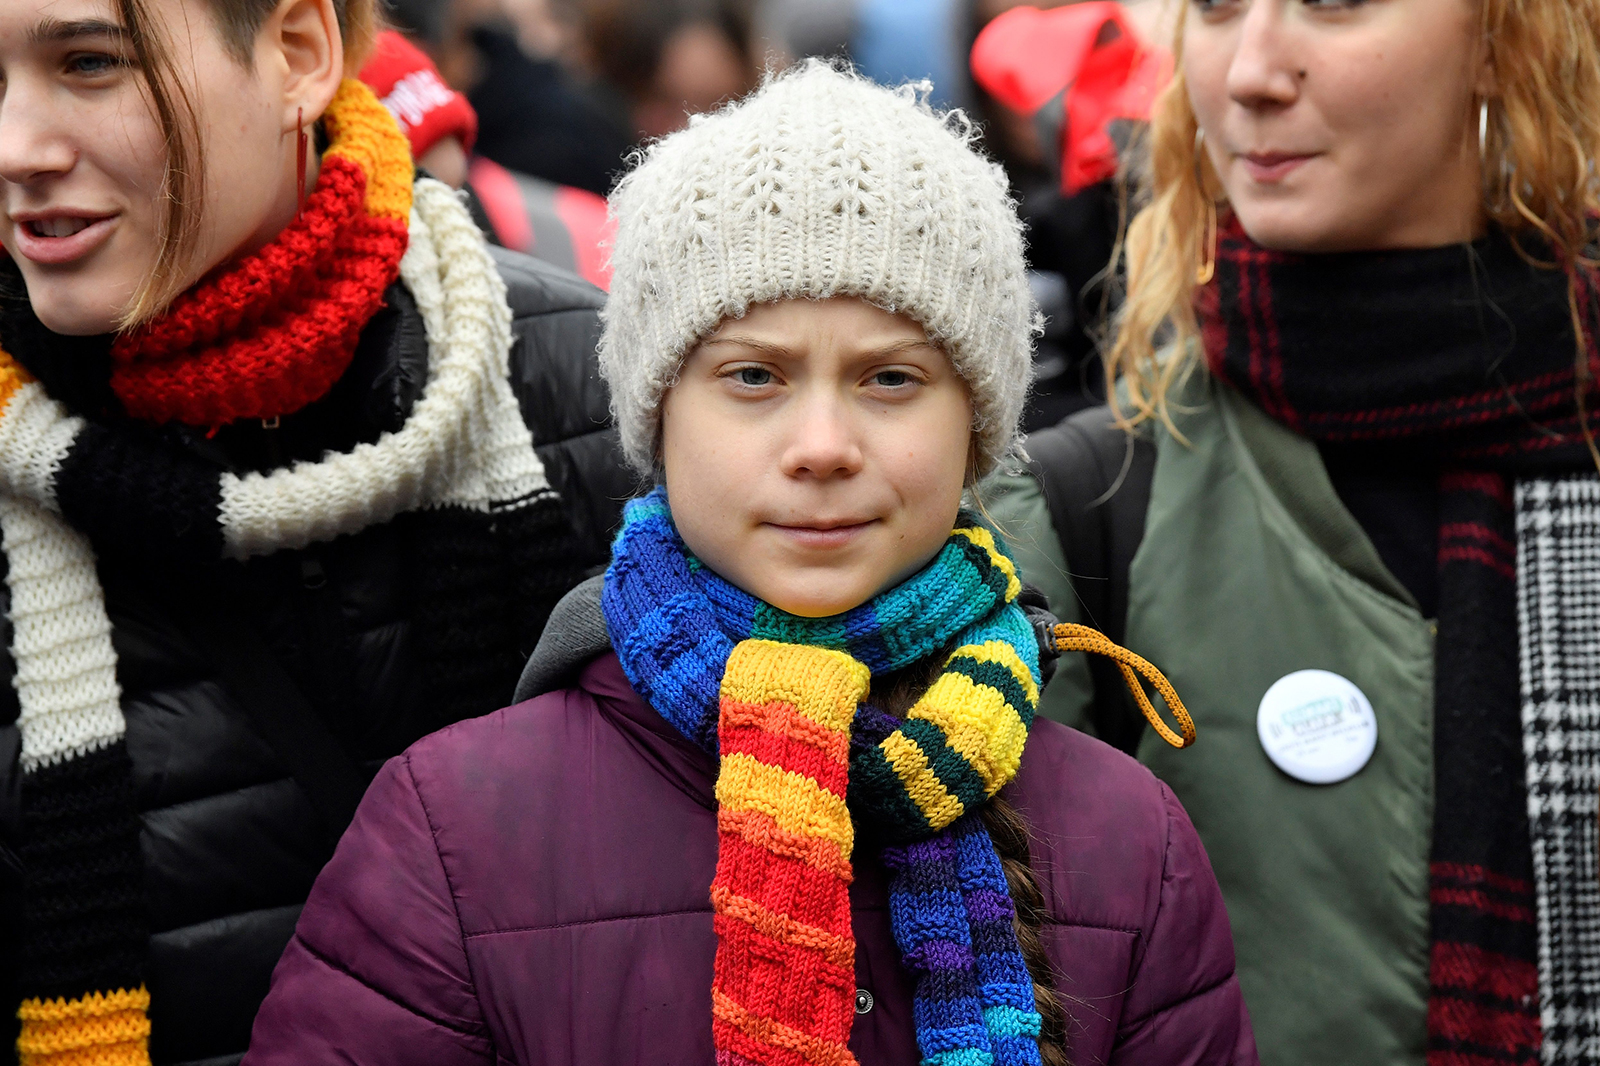 Swedish climate activist Greta Thunberg takes part in a "Youth Strike 4 Climate" protest march on March 6, in Brussels.